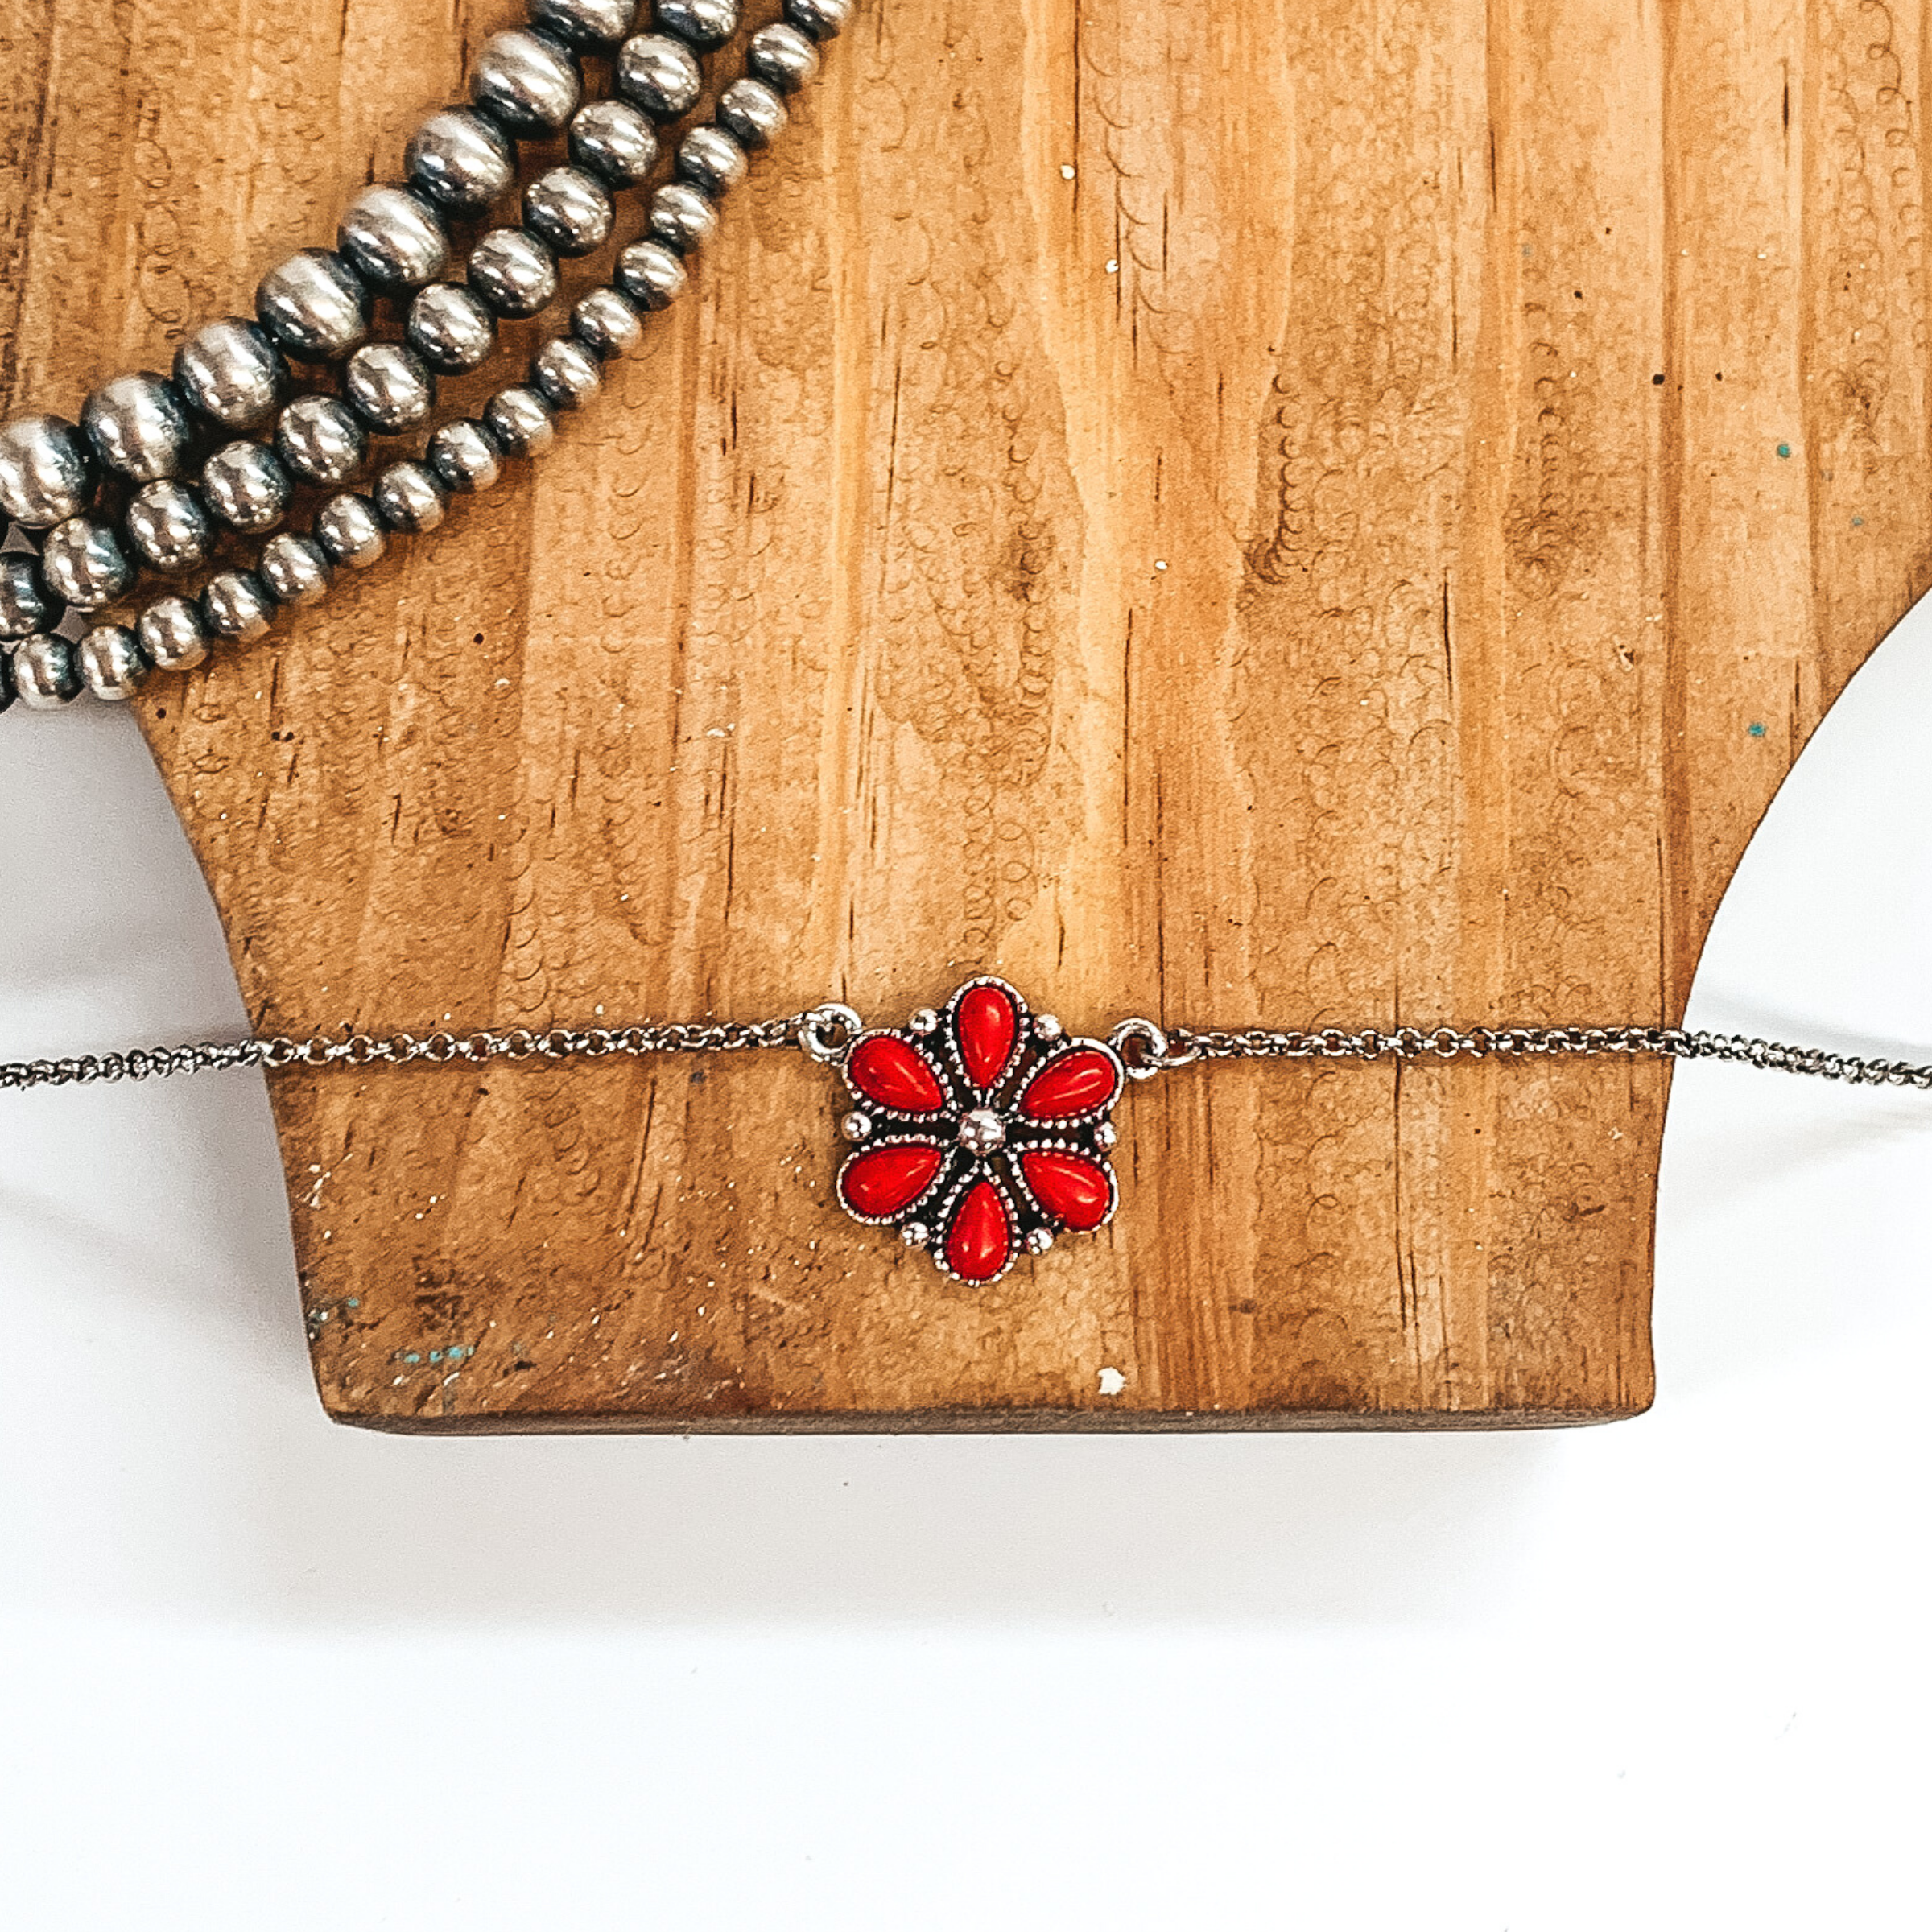 Silver chained necklace with a silver flower pendant that includes red stones. This necklace is pictured laying on a brown necklace holder with silver pearls in the top left corner as decoration